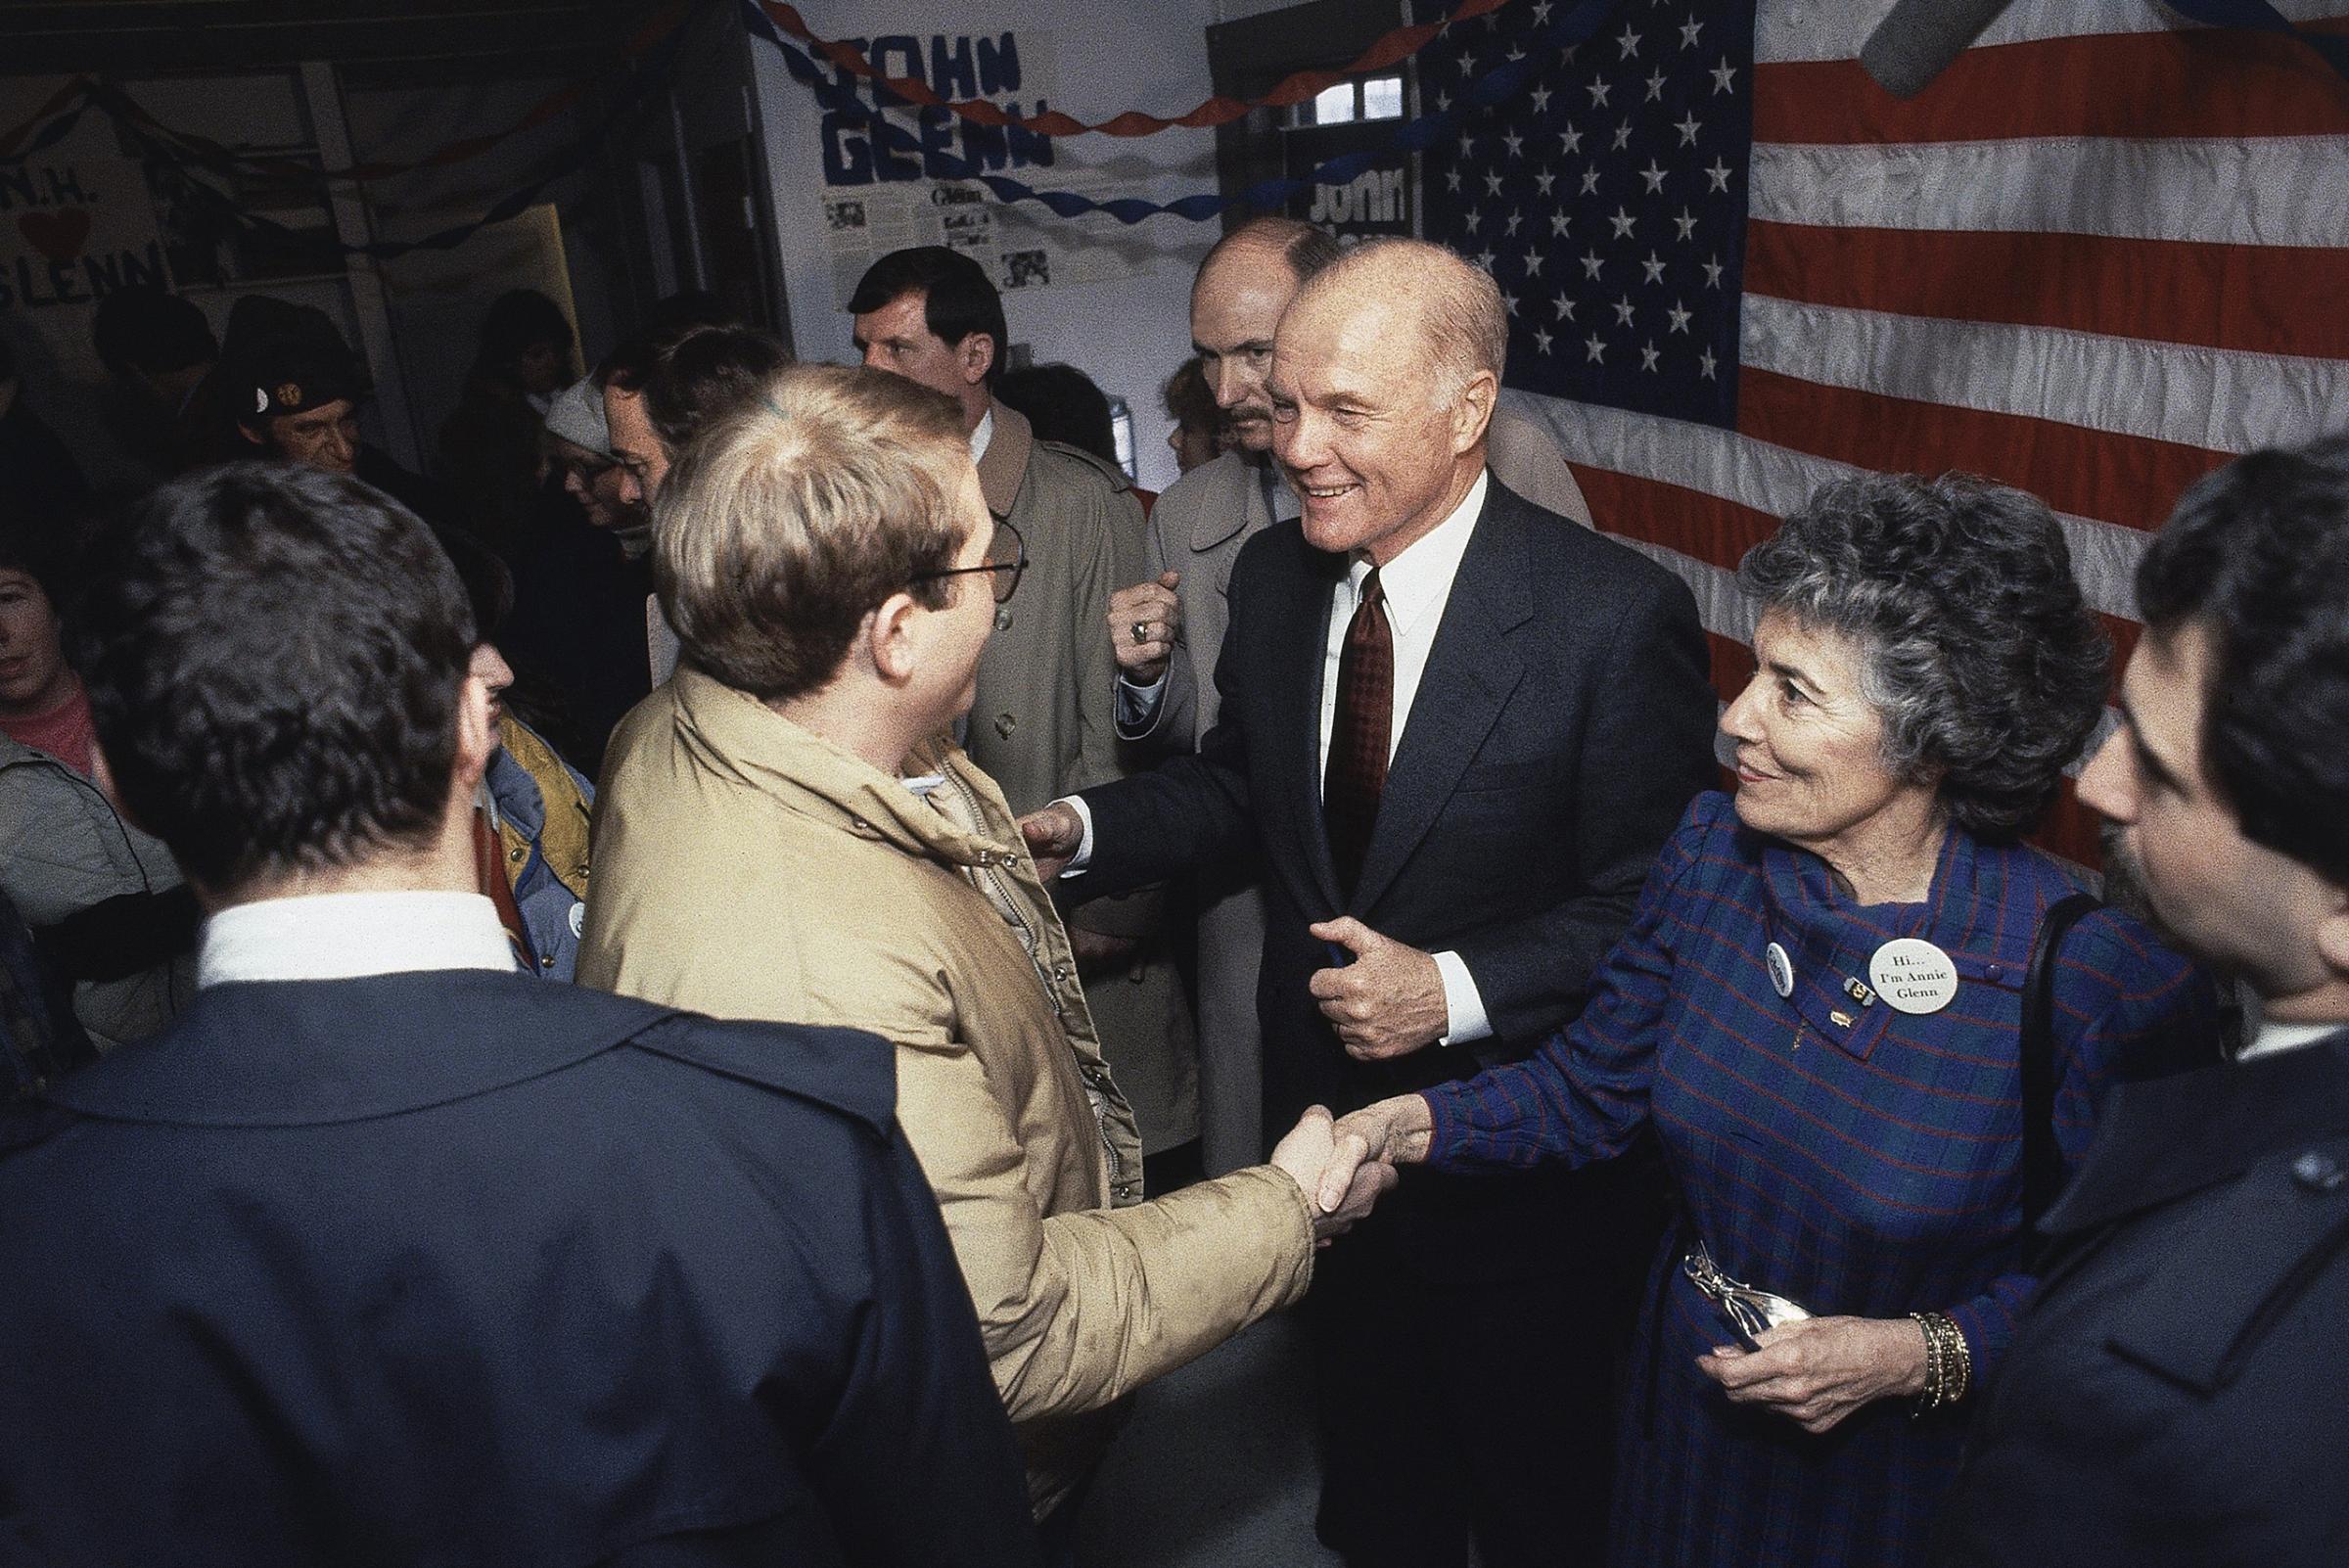 A Run for the Highest Office (on Earth) A presidential candidate in 1984, Glenn campaigned with his wife Annie in New Hampshire. Though his Senate wins came easily after his first victory, Glenn proved a harder sell to a national electorate, mostly because of his dry — the media would call it boring — campaign style.